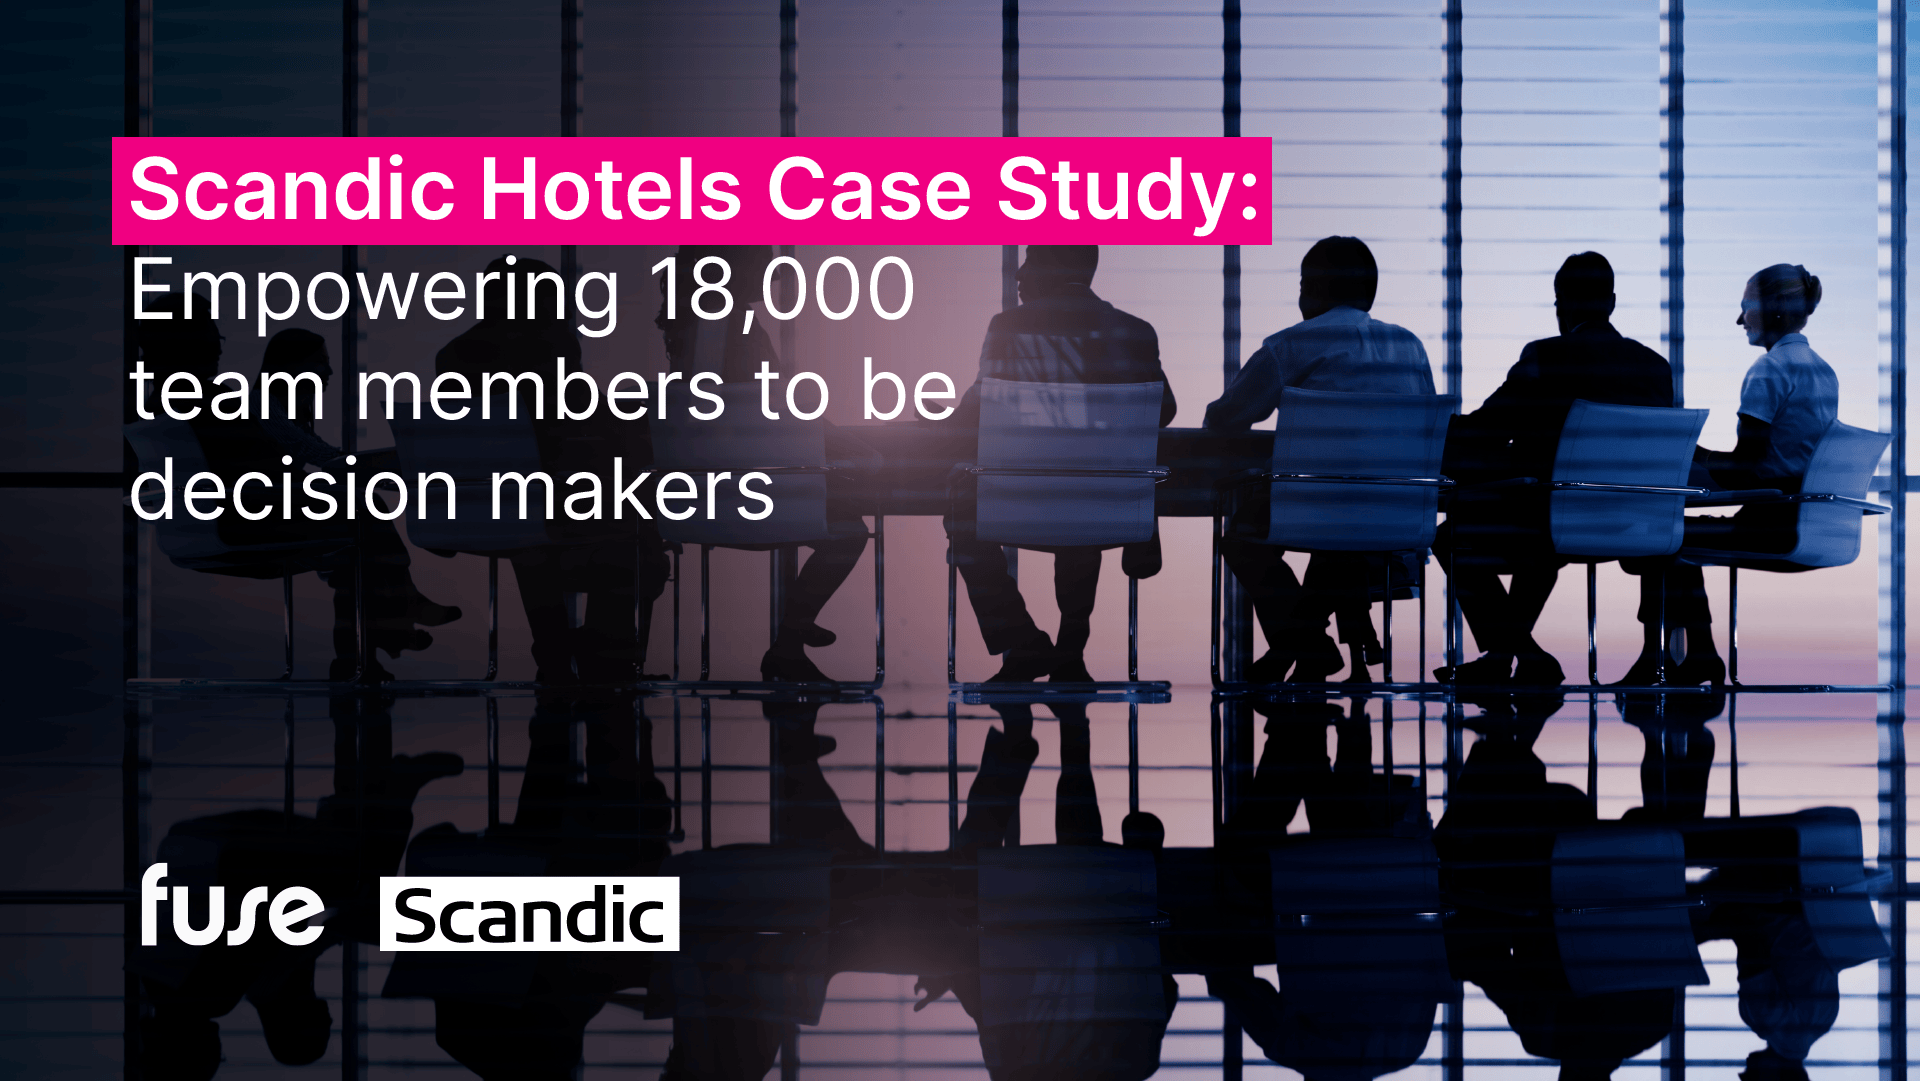 [Video] Scandic Hotels Case Study: Empowering 18,000 team members to be decision makers